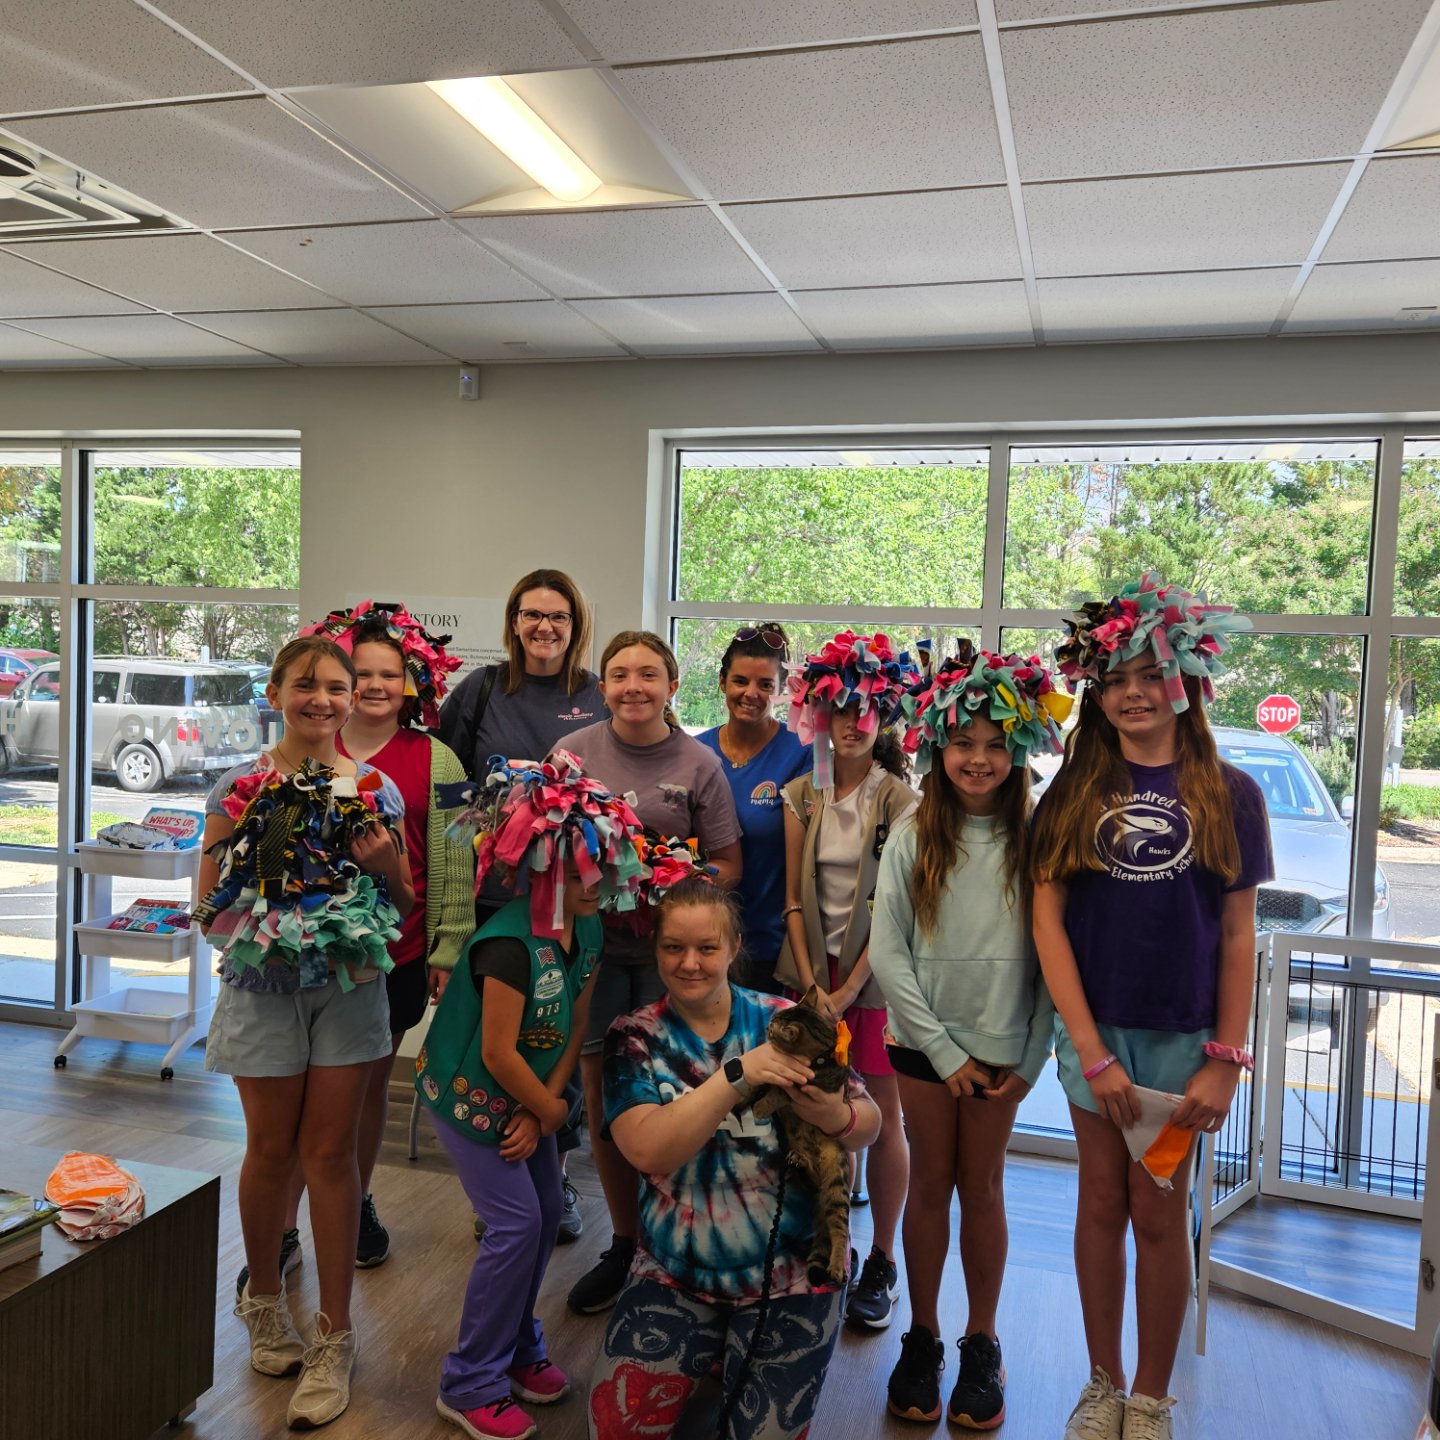 Huge shoutout to the amazing Girl Scout Troop 973! 🎉

This weekend, they not only dropped off some much-needed donations but also crafted super fun Snuffle Mats for our furry friends here at RAL. (They also showed us they can double as very fashiona